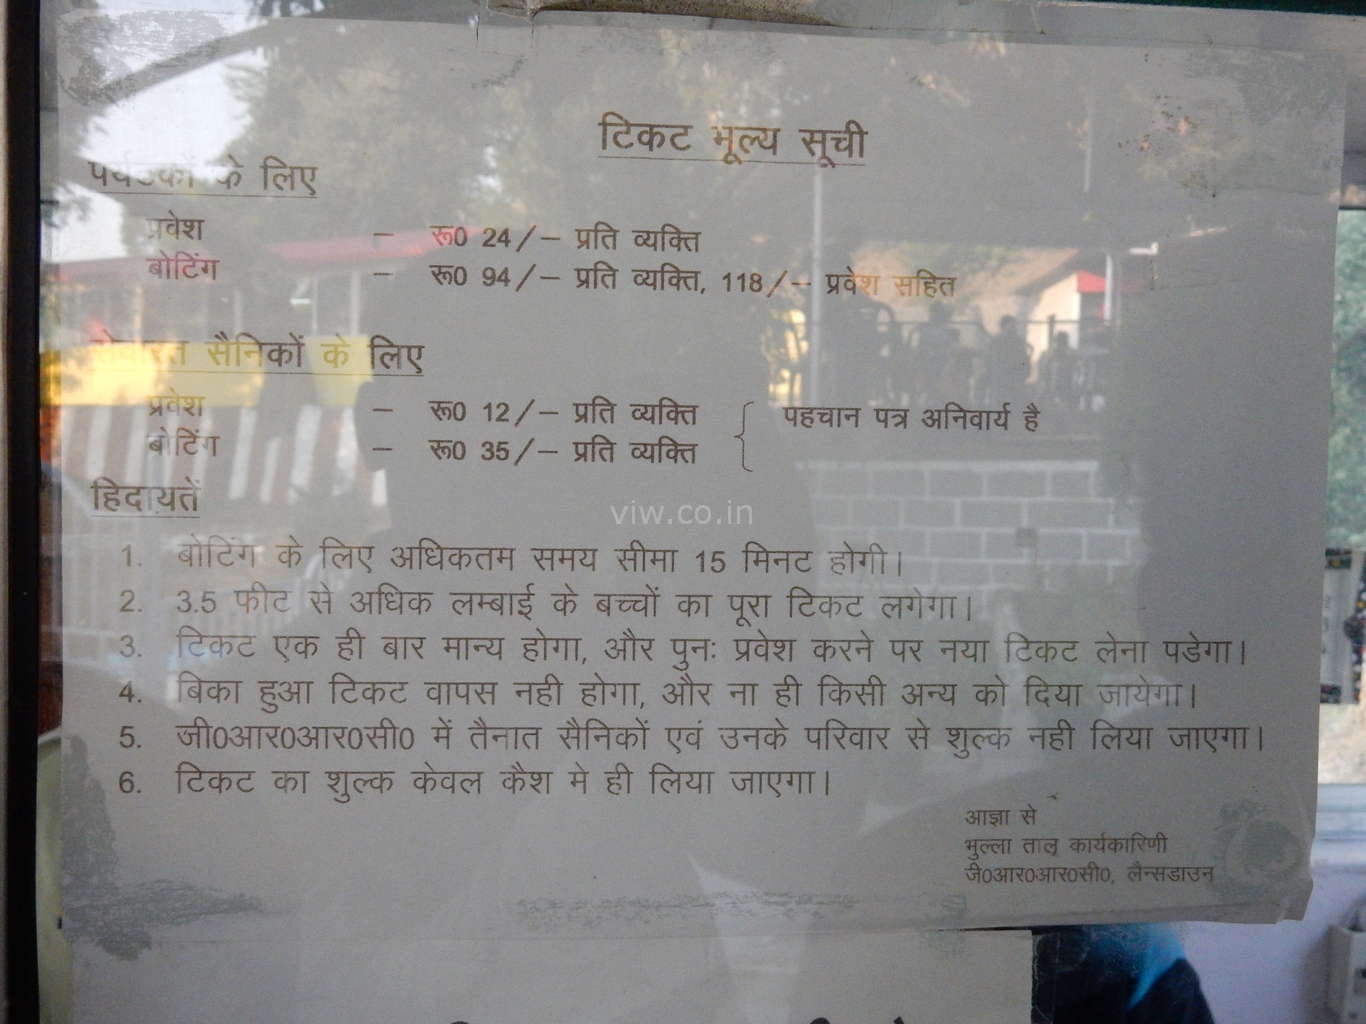 Ticket price of entry to Bhulla taal lake